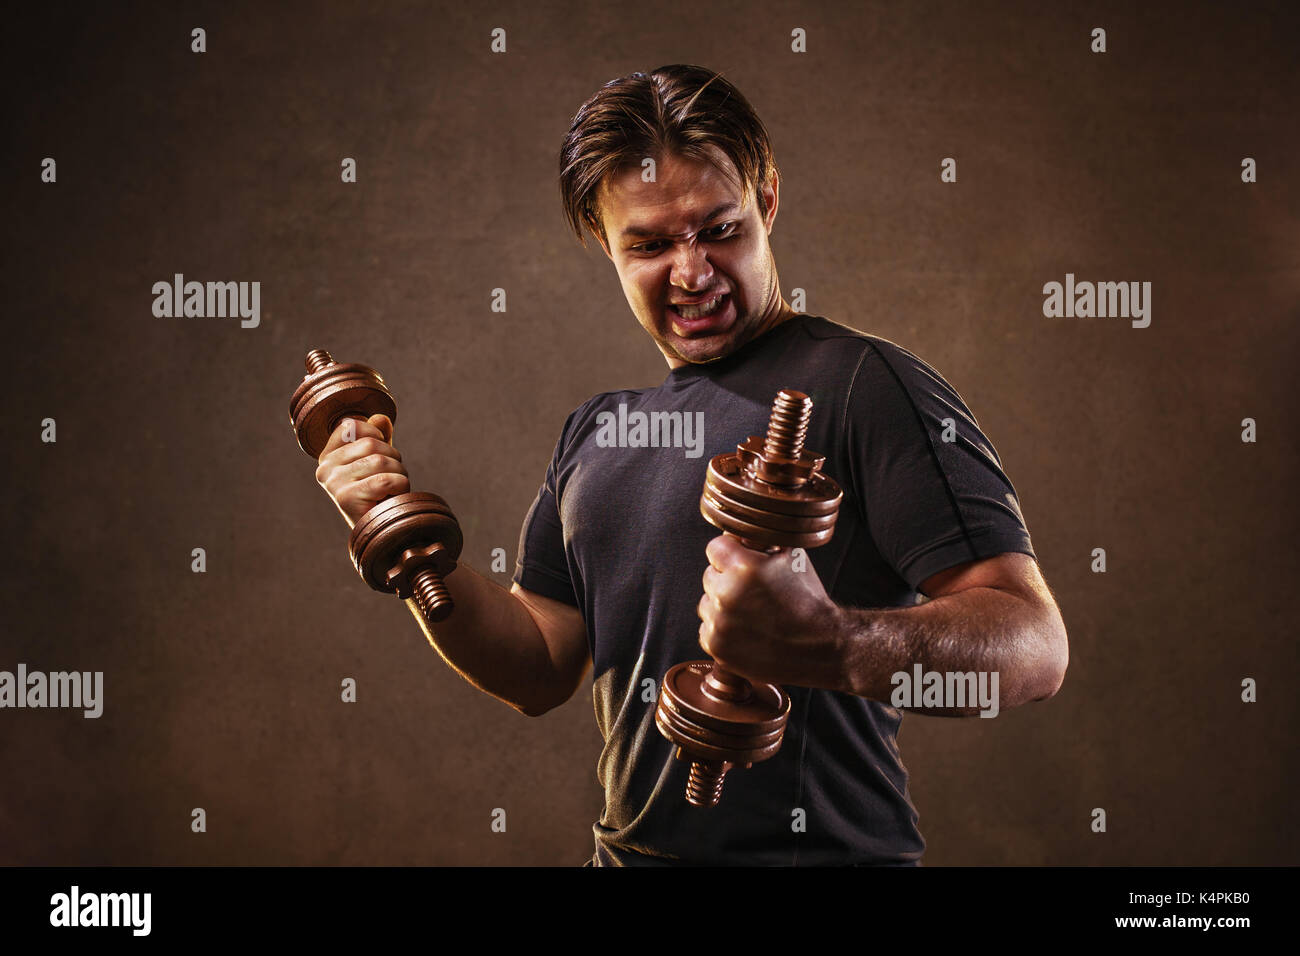 Young man hardly doing exercises with dumbbells on stone wall background. Stress and effort emotions. Stock Photo